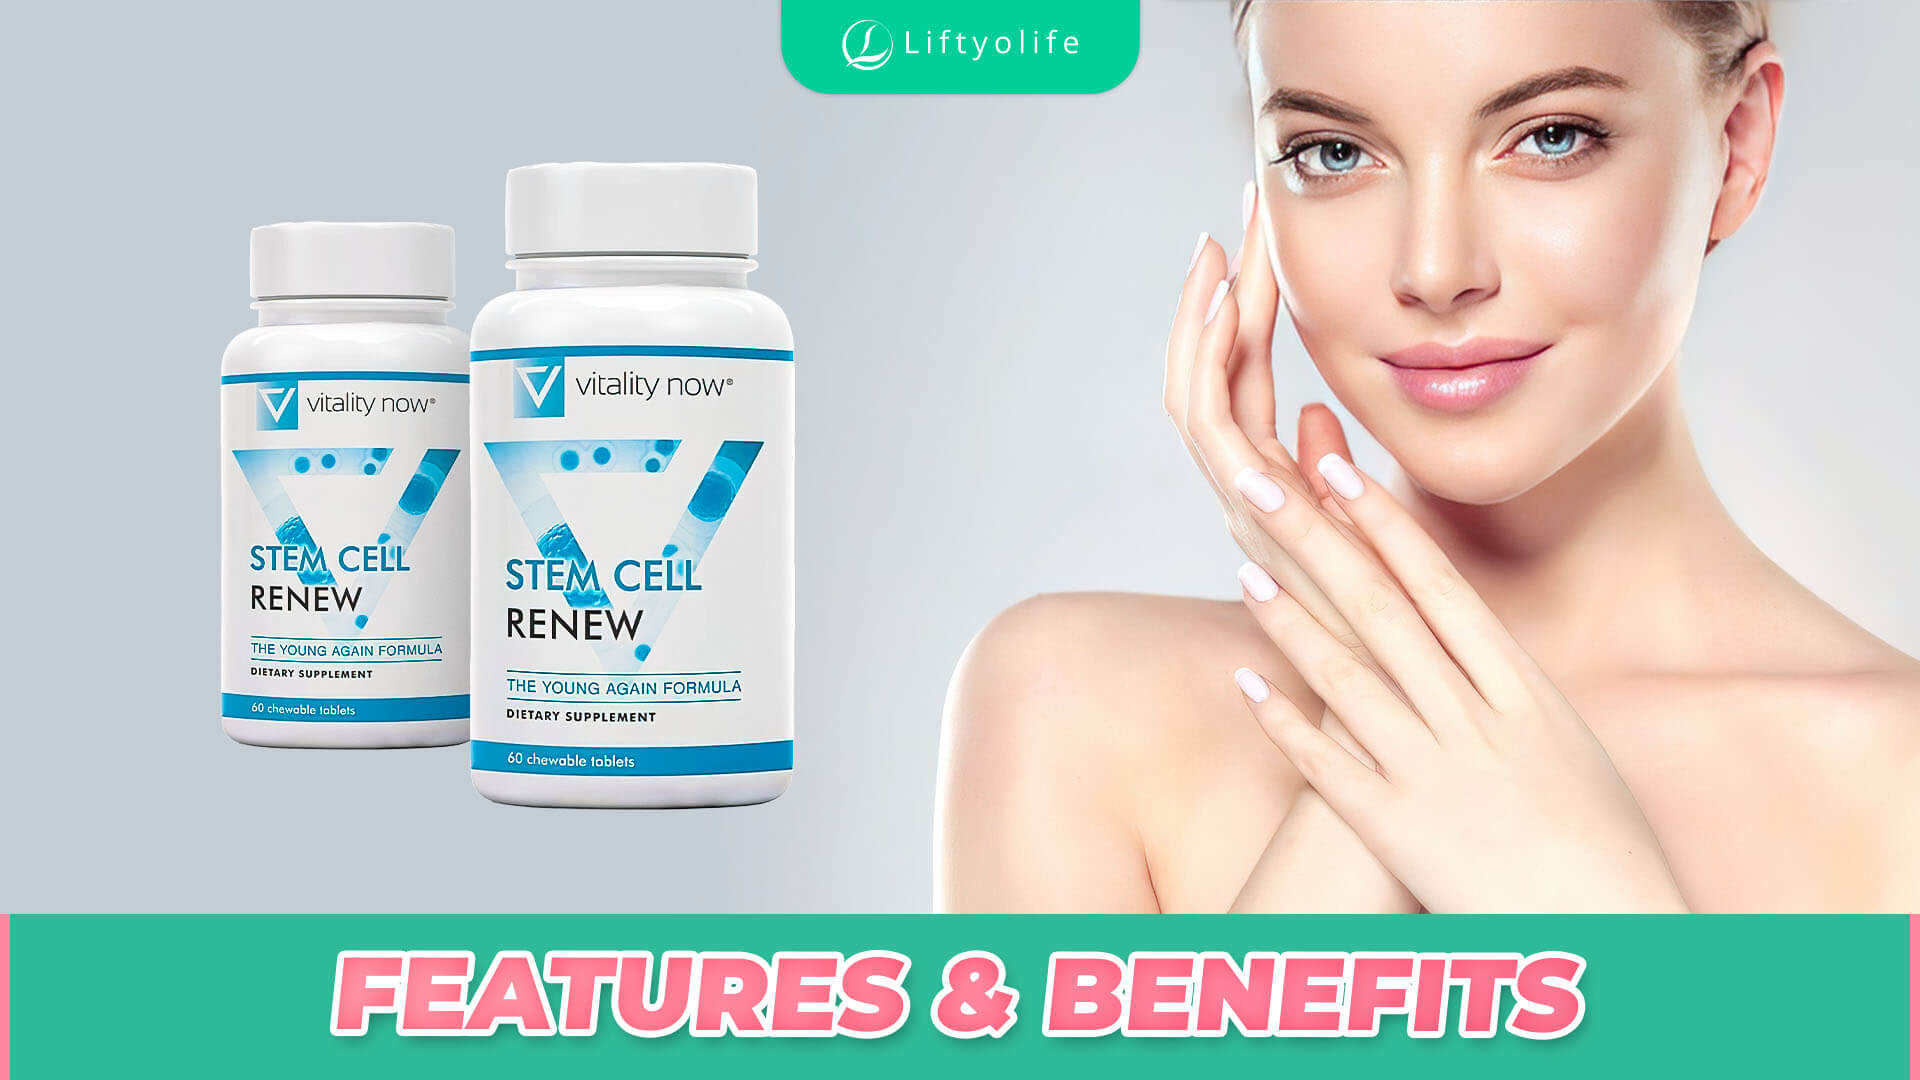 Stem Cell Renew Features & Benefits